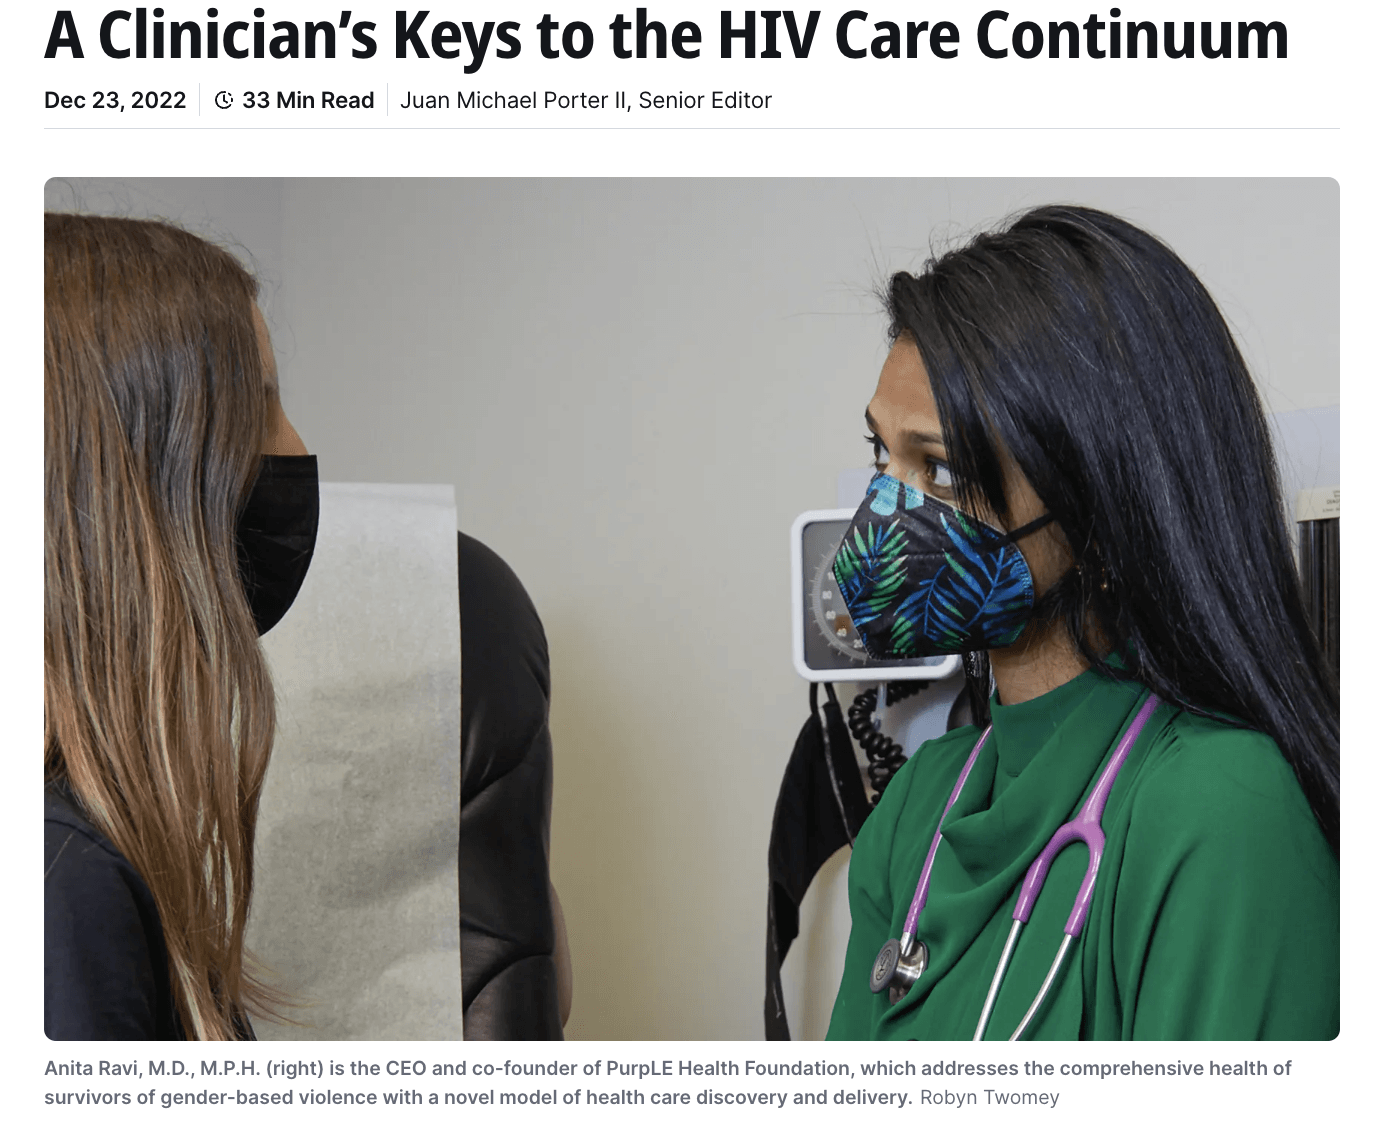 A Clinician’s Keys to the HIV Care Continuum